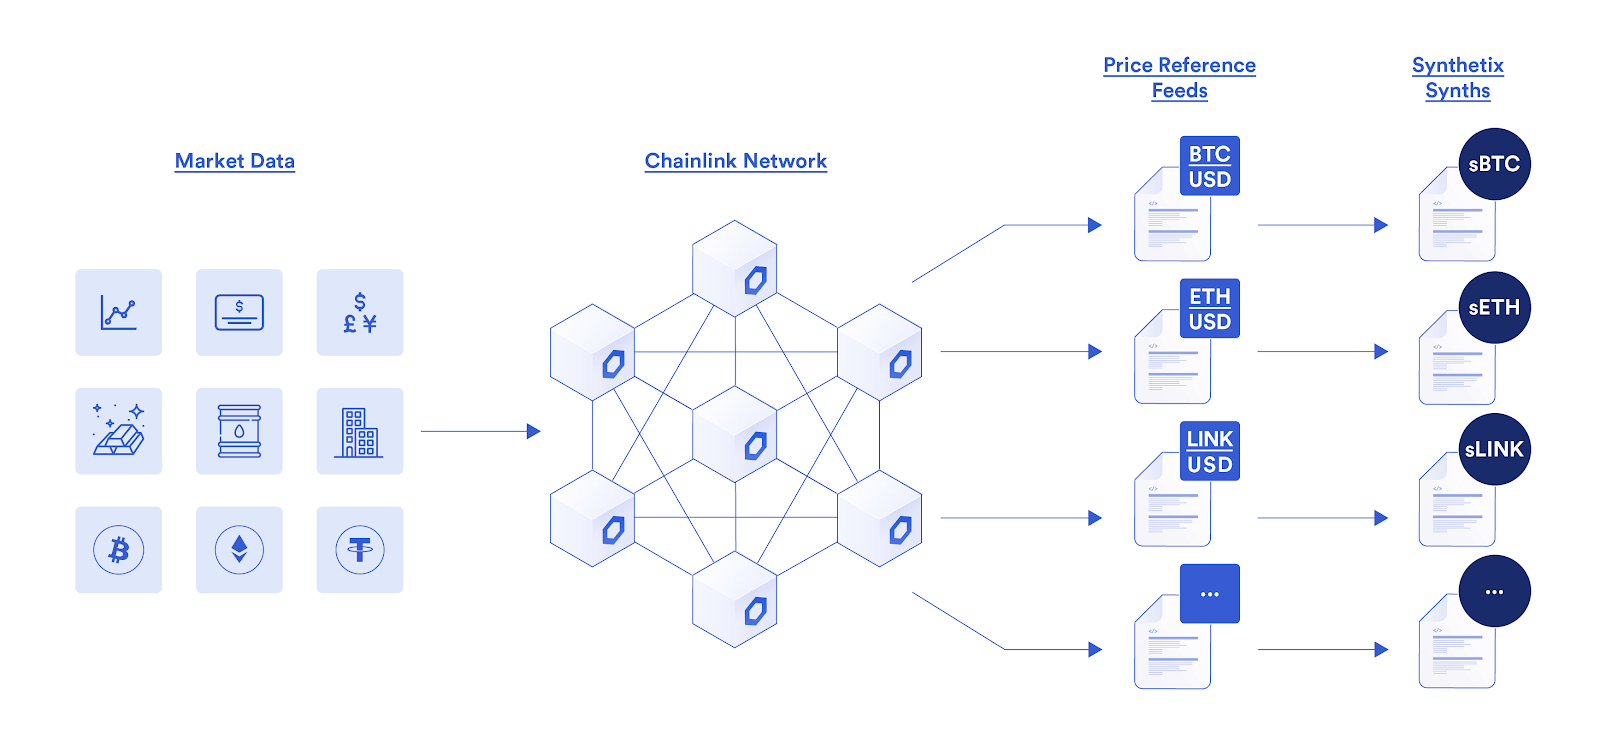 Synthetix uses Chainlink Price Feeds as the target peg for numerous synthetic assets